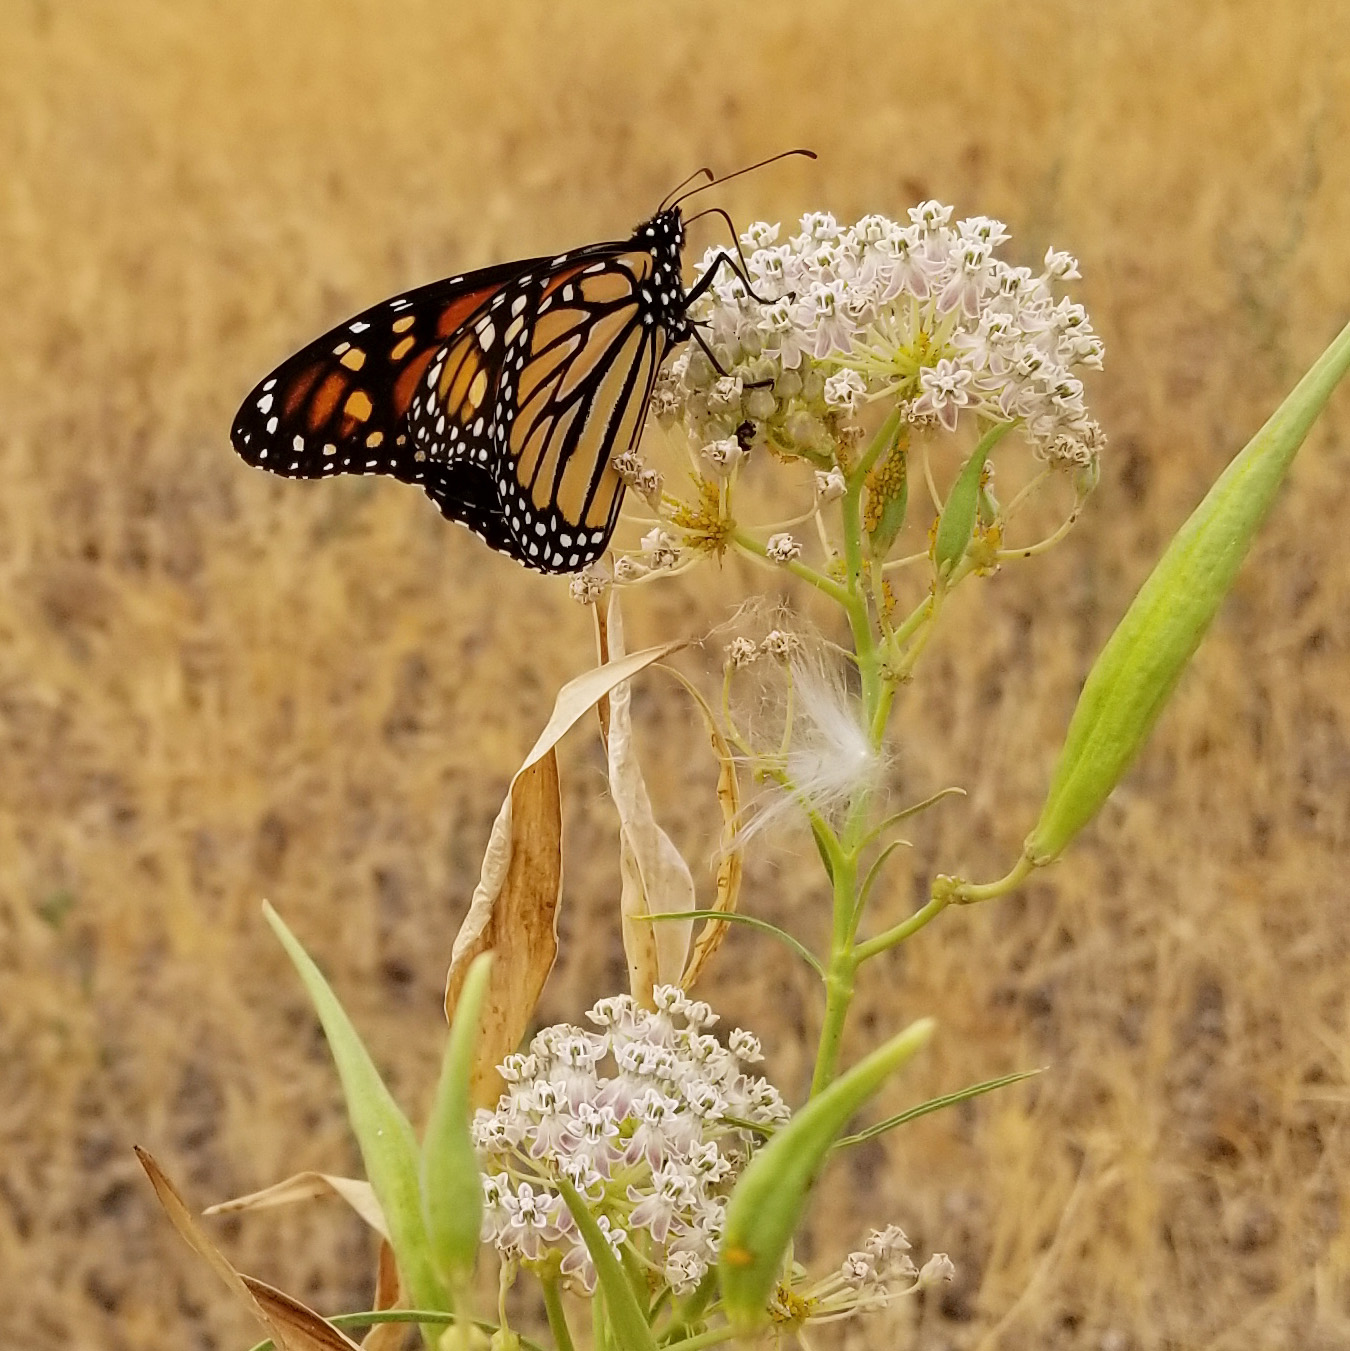 A monarch nectars on off-white milkweed blossoms in a dry field. There is a tuft of milkweed seed on the plant.